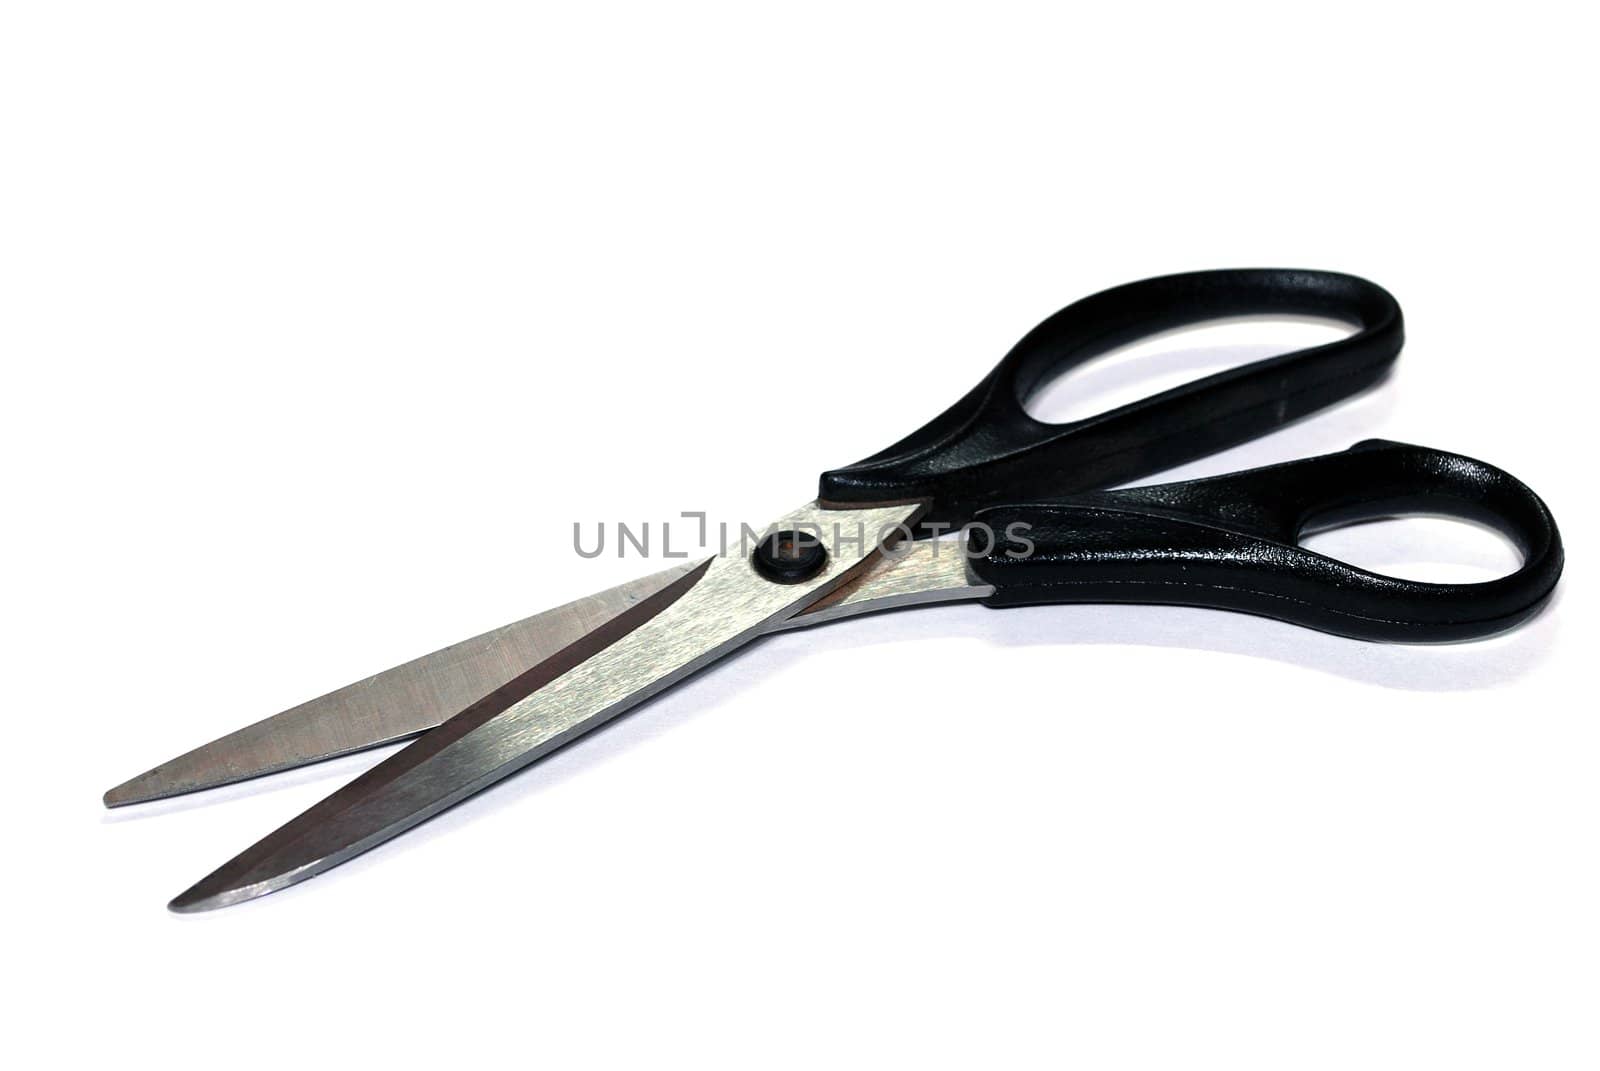 Sharp Scissors with Black Handle Isolated on White